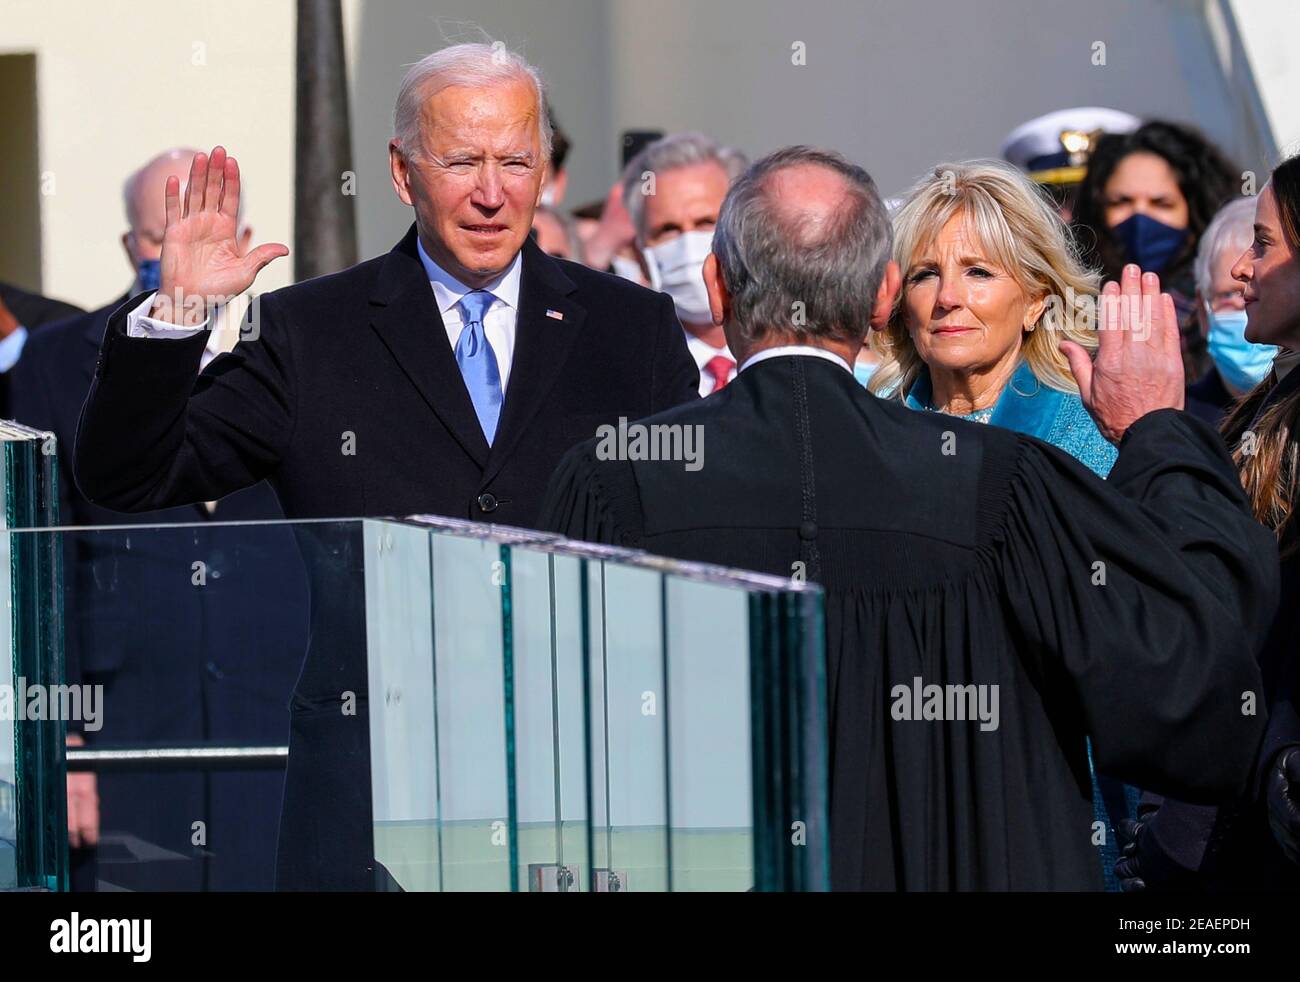 WASHINGTON DC, USA - 20 January 2021 - US President Joseph R. Biden Jr. addresses the nation after taking the oath of office at his Presidential Inaug Stock Photo